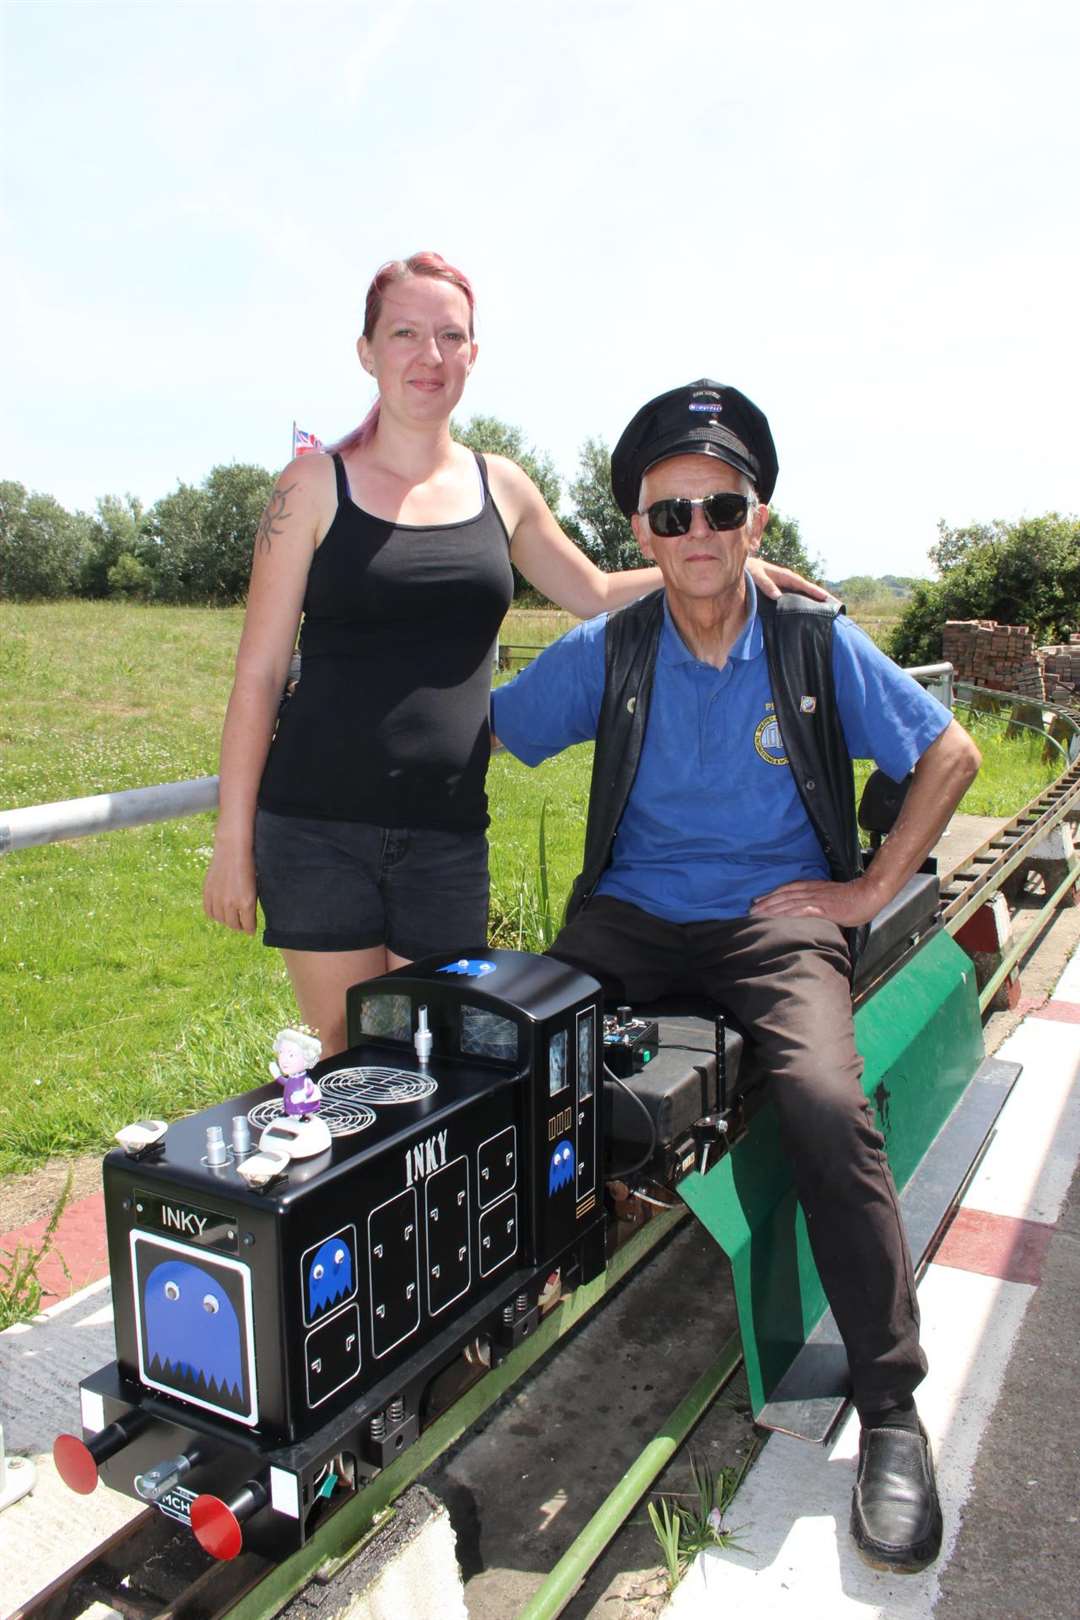 Family affair: Alex-Maria McCallister from Faversham and dad Phil Harpum from Sittingbourne at the Sheppey Miniature Model Engineering Society site at Barton's Point, Sheerness (2713856)